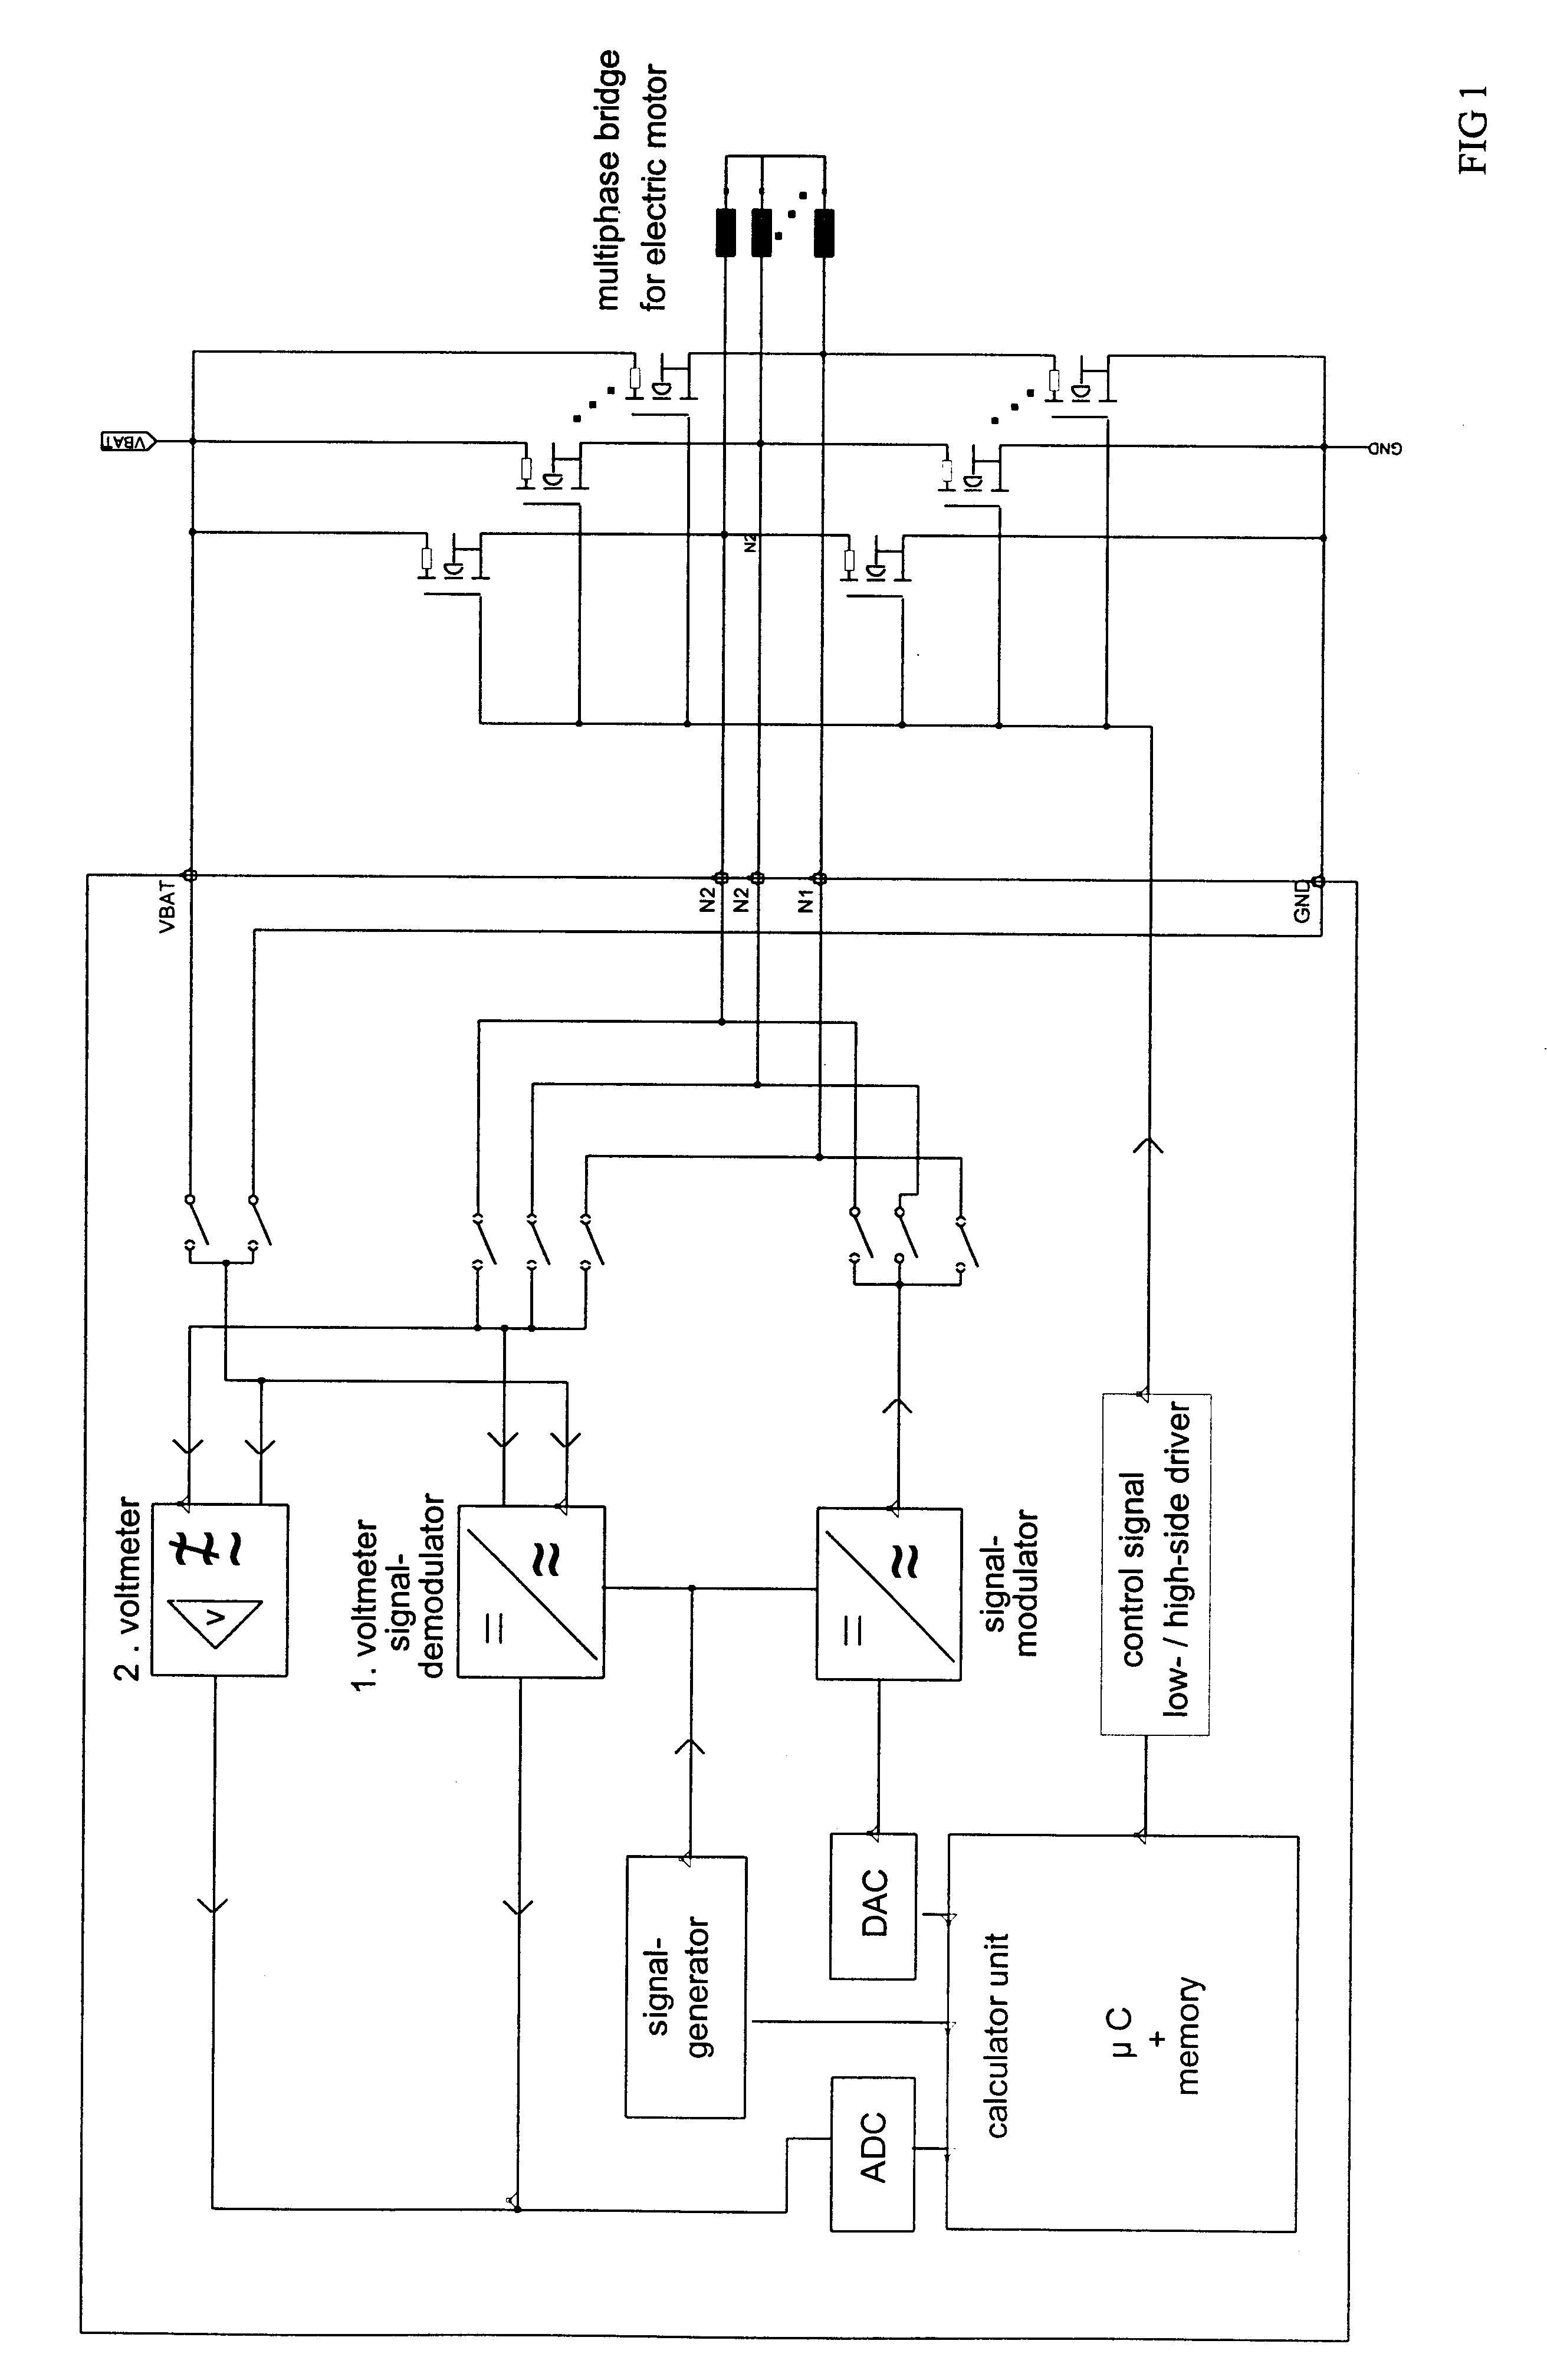 Circuit arrangement for monitoring an electronic switch controlling a load